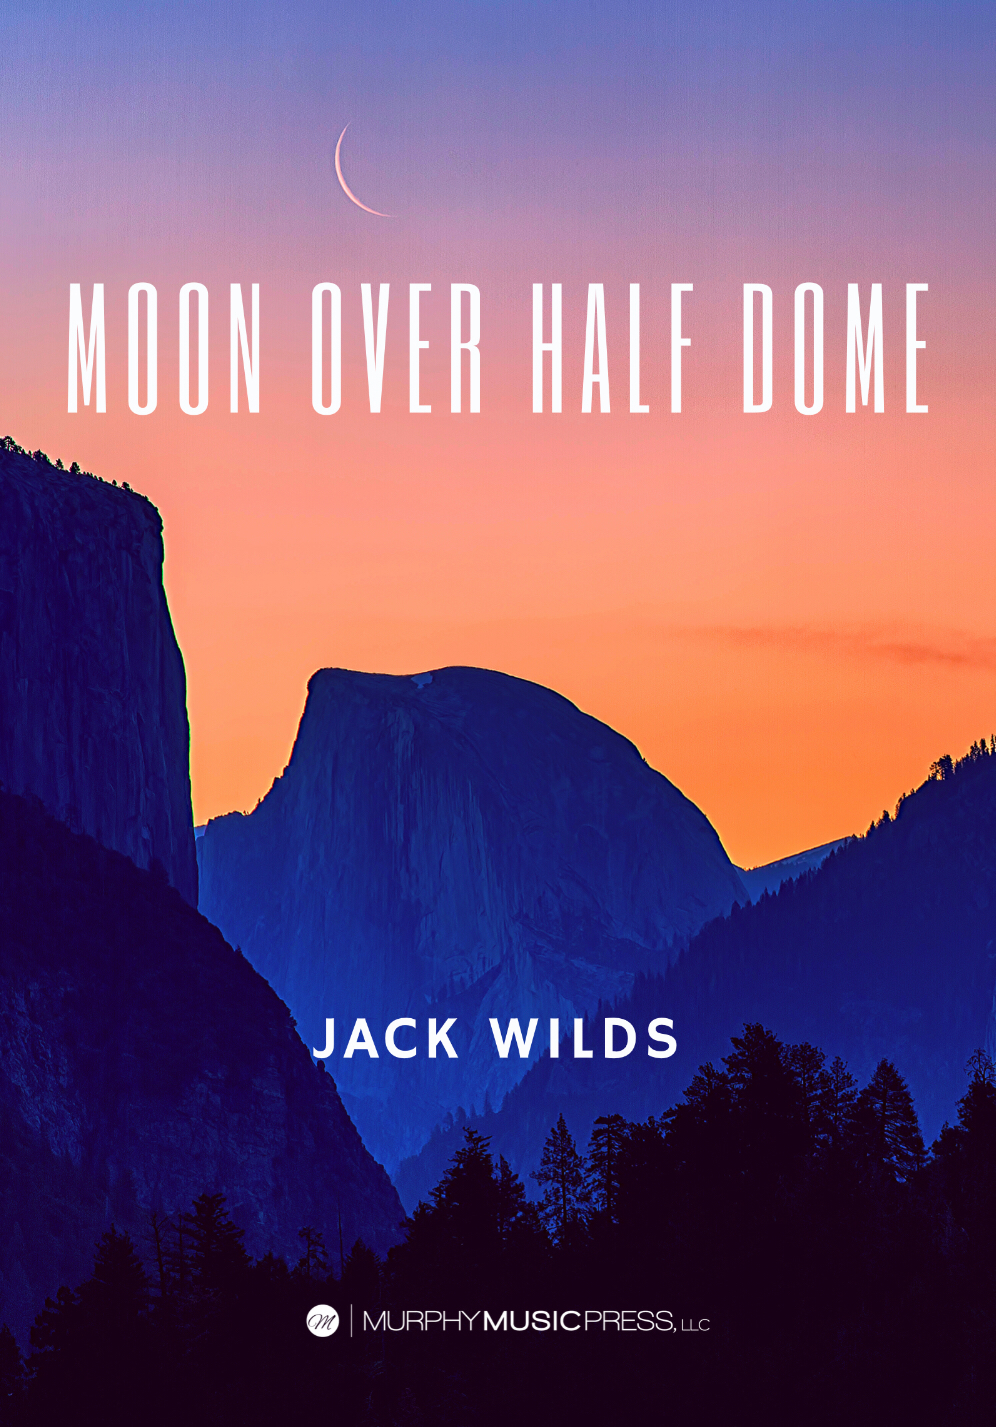 Moon Over Half Dome by Jack Wilds